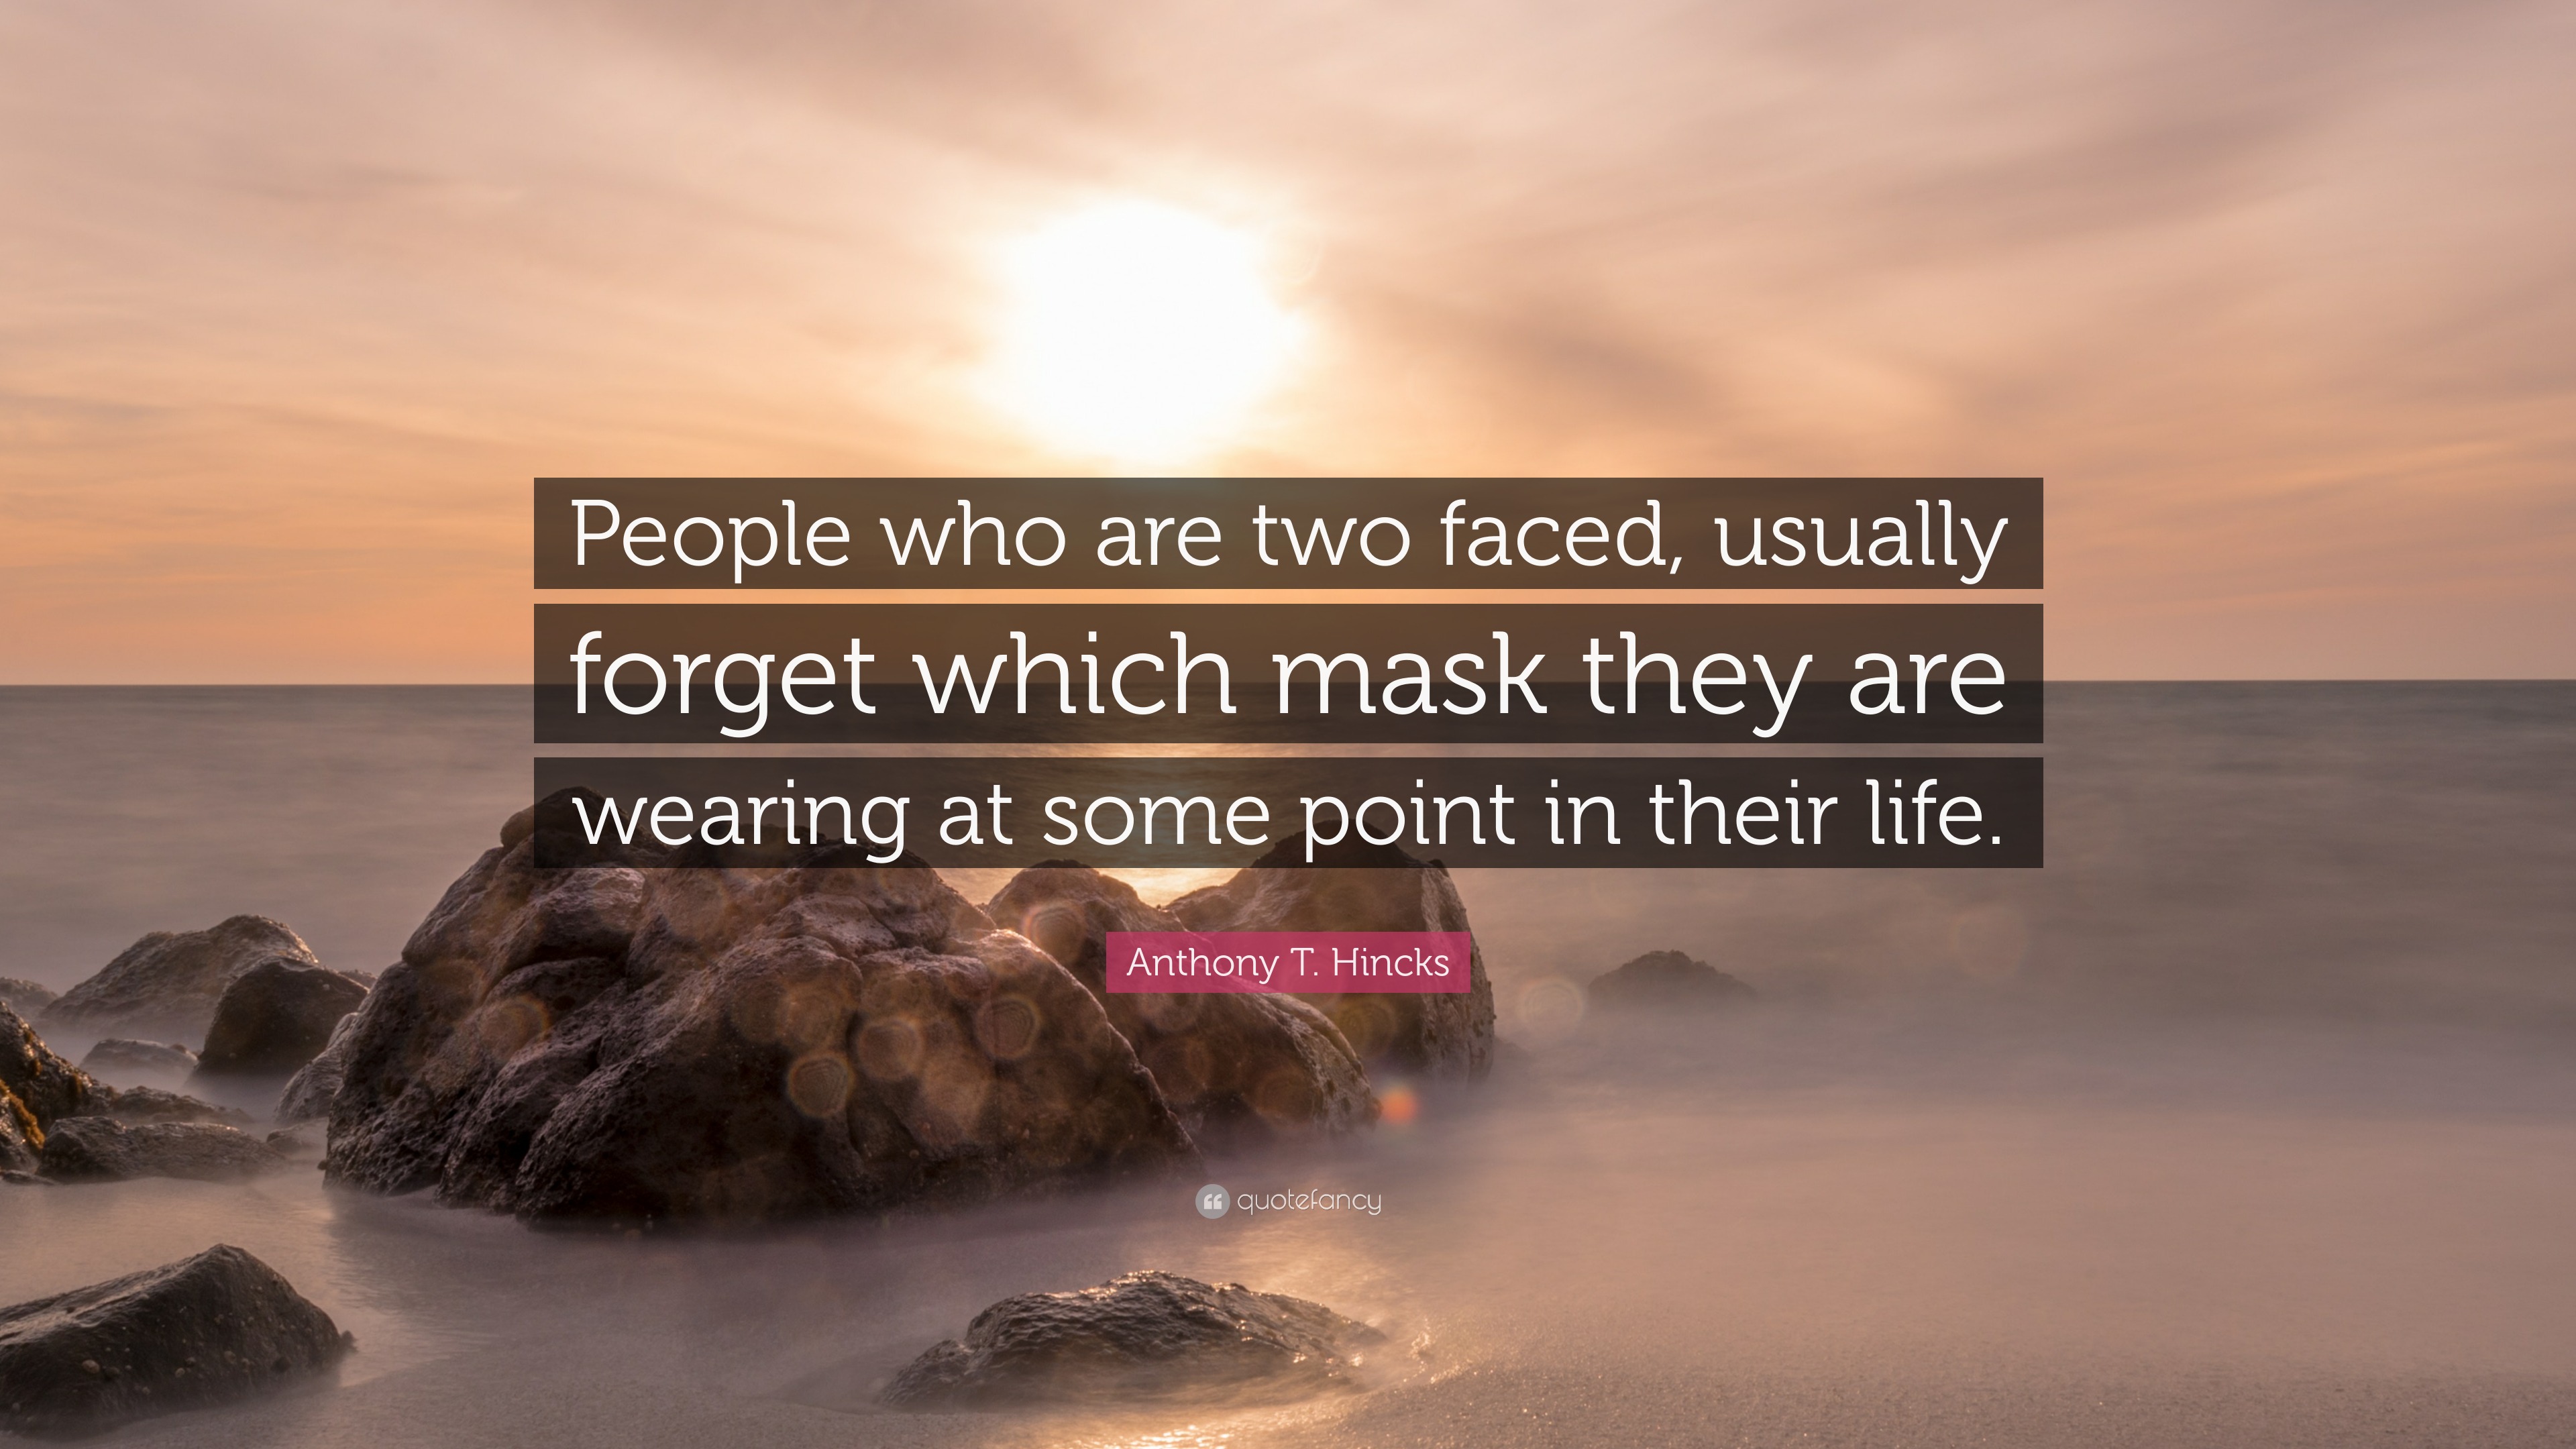 Anthony T. Hincks Quote: “People who are two faced, usually forget which  mask they are wearing